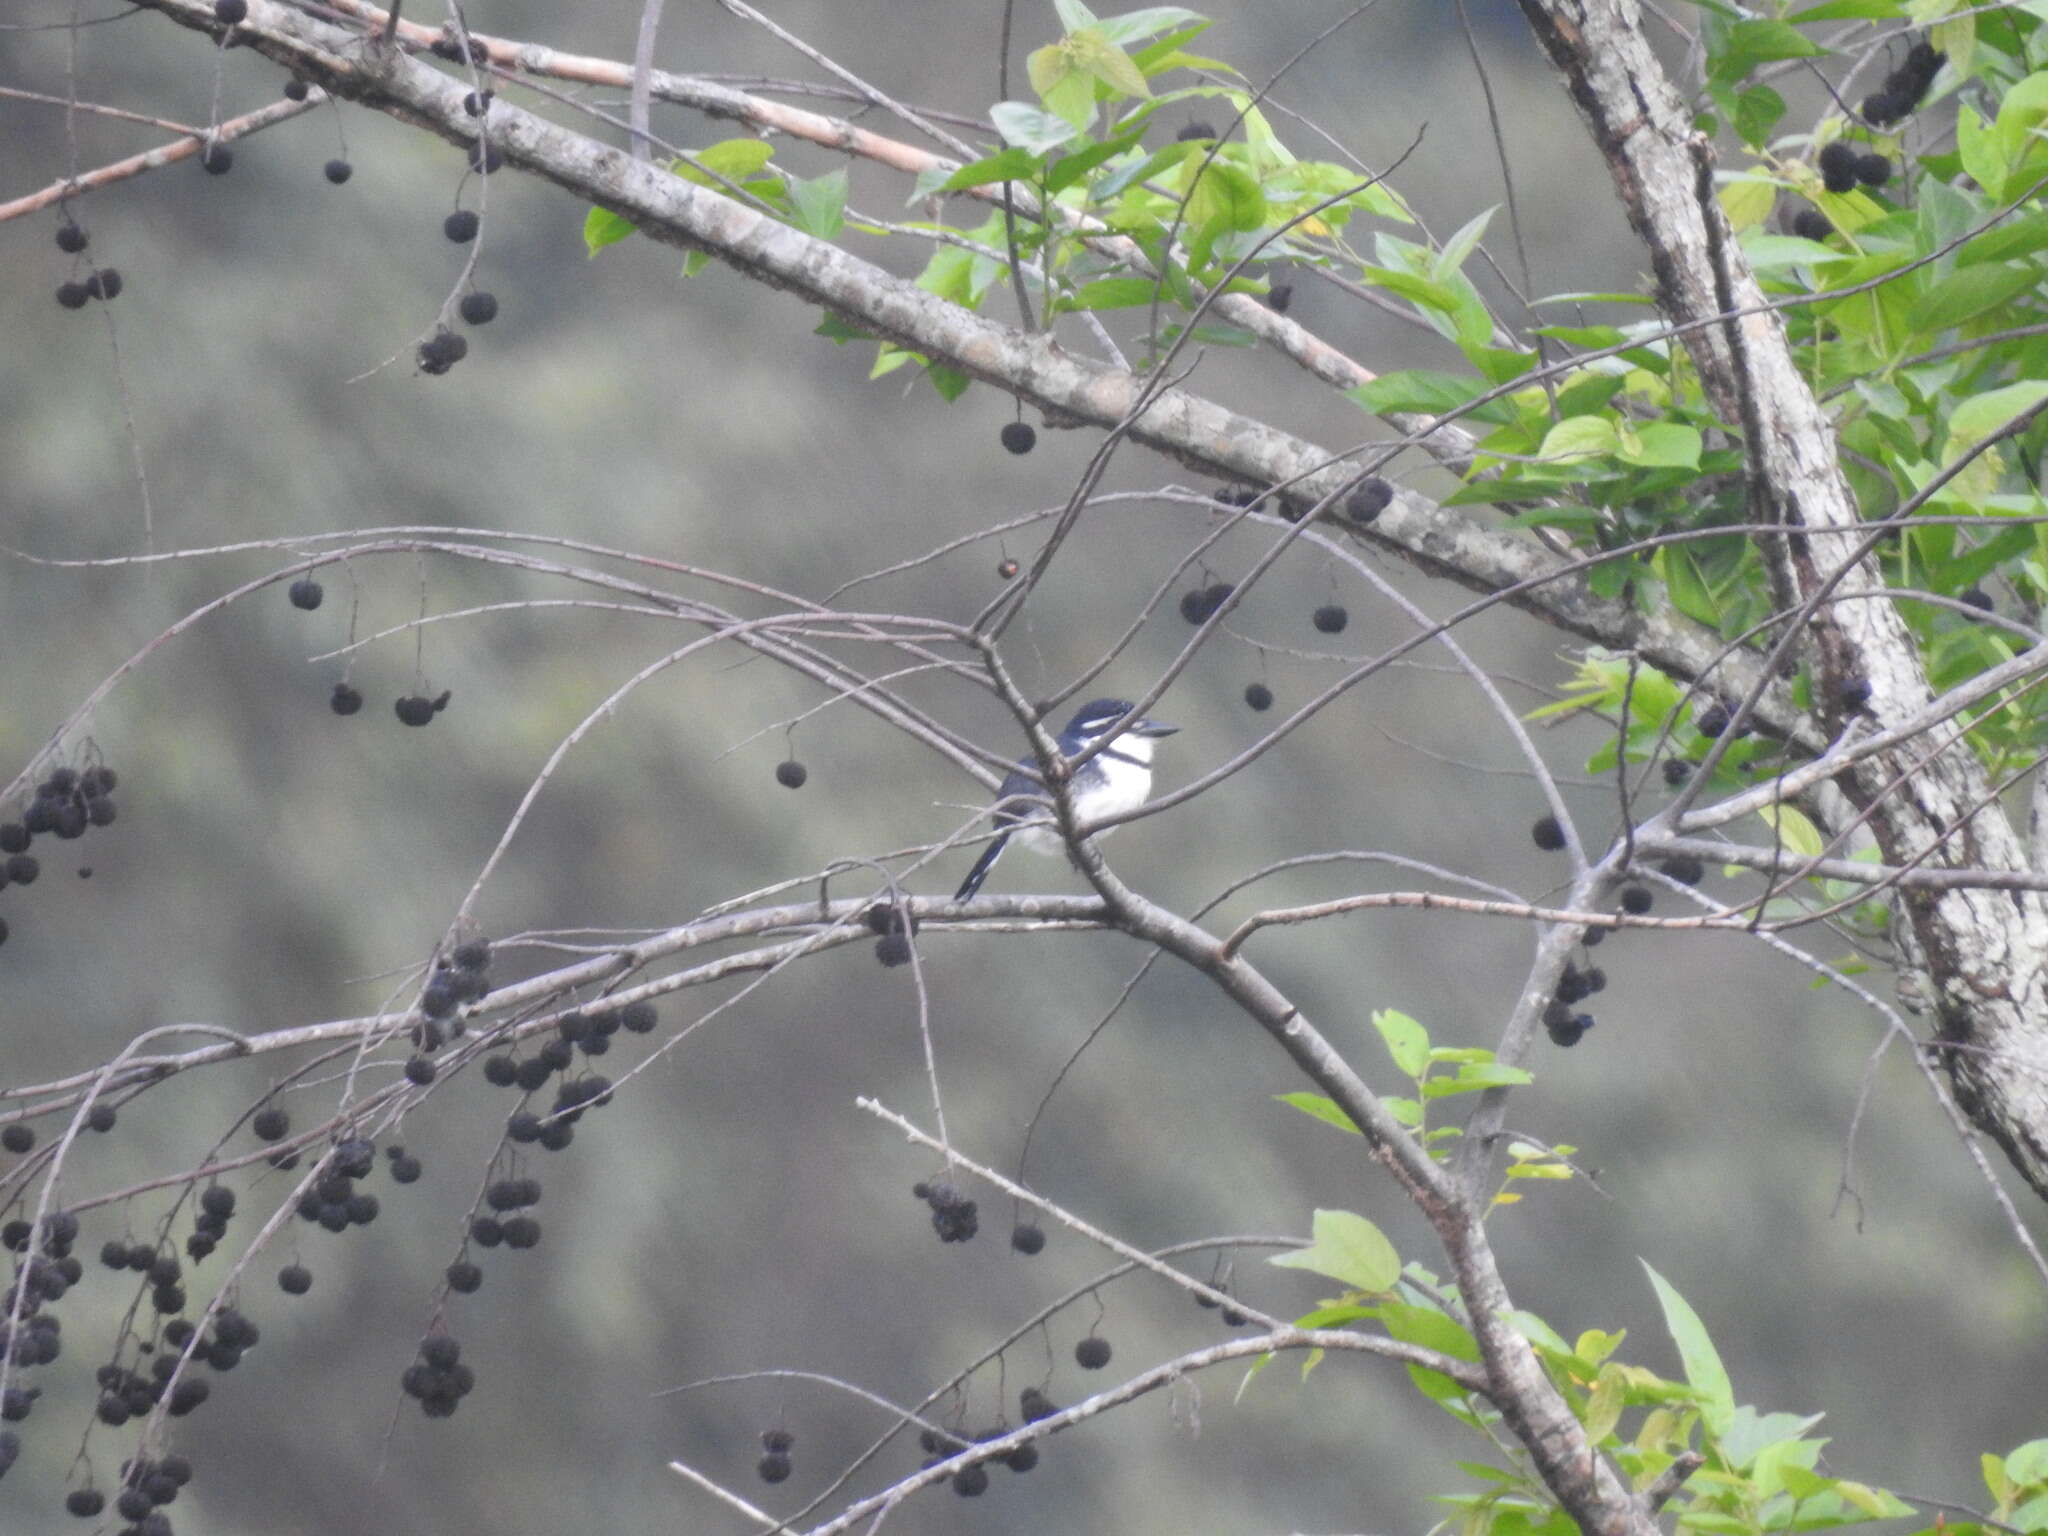 Image of Greater Pied Puffbird